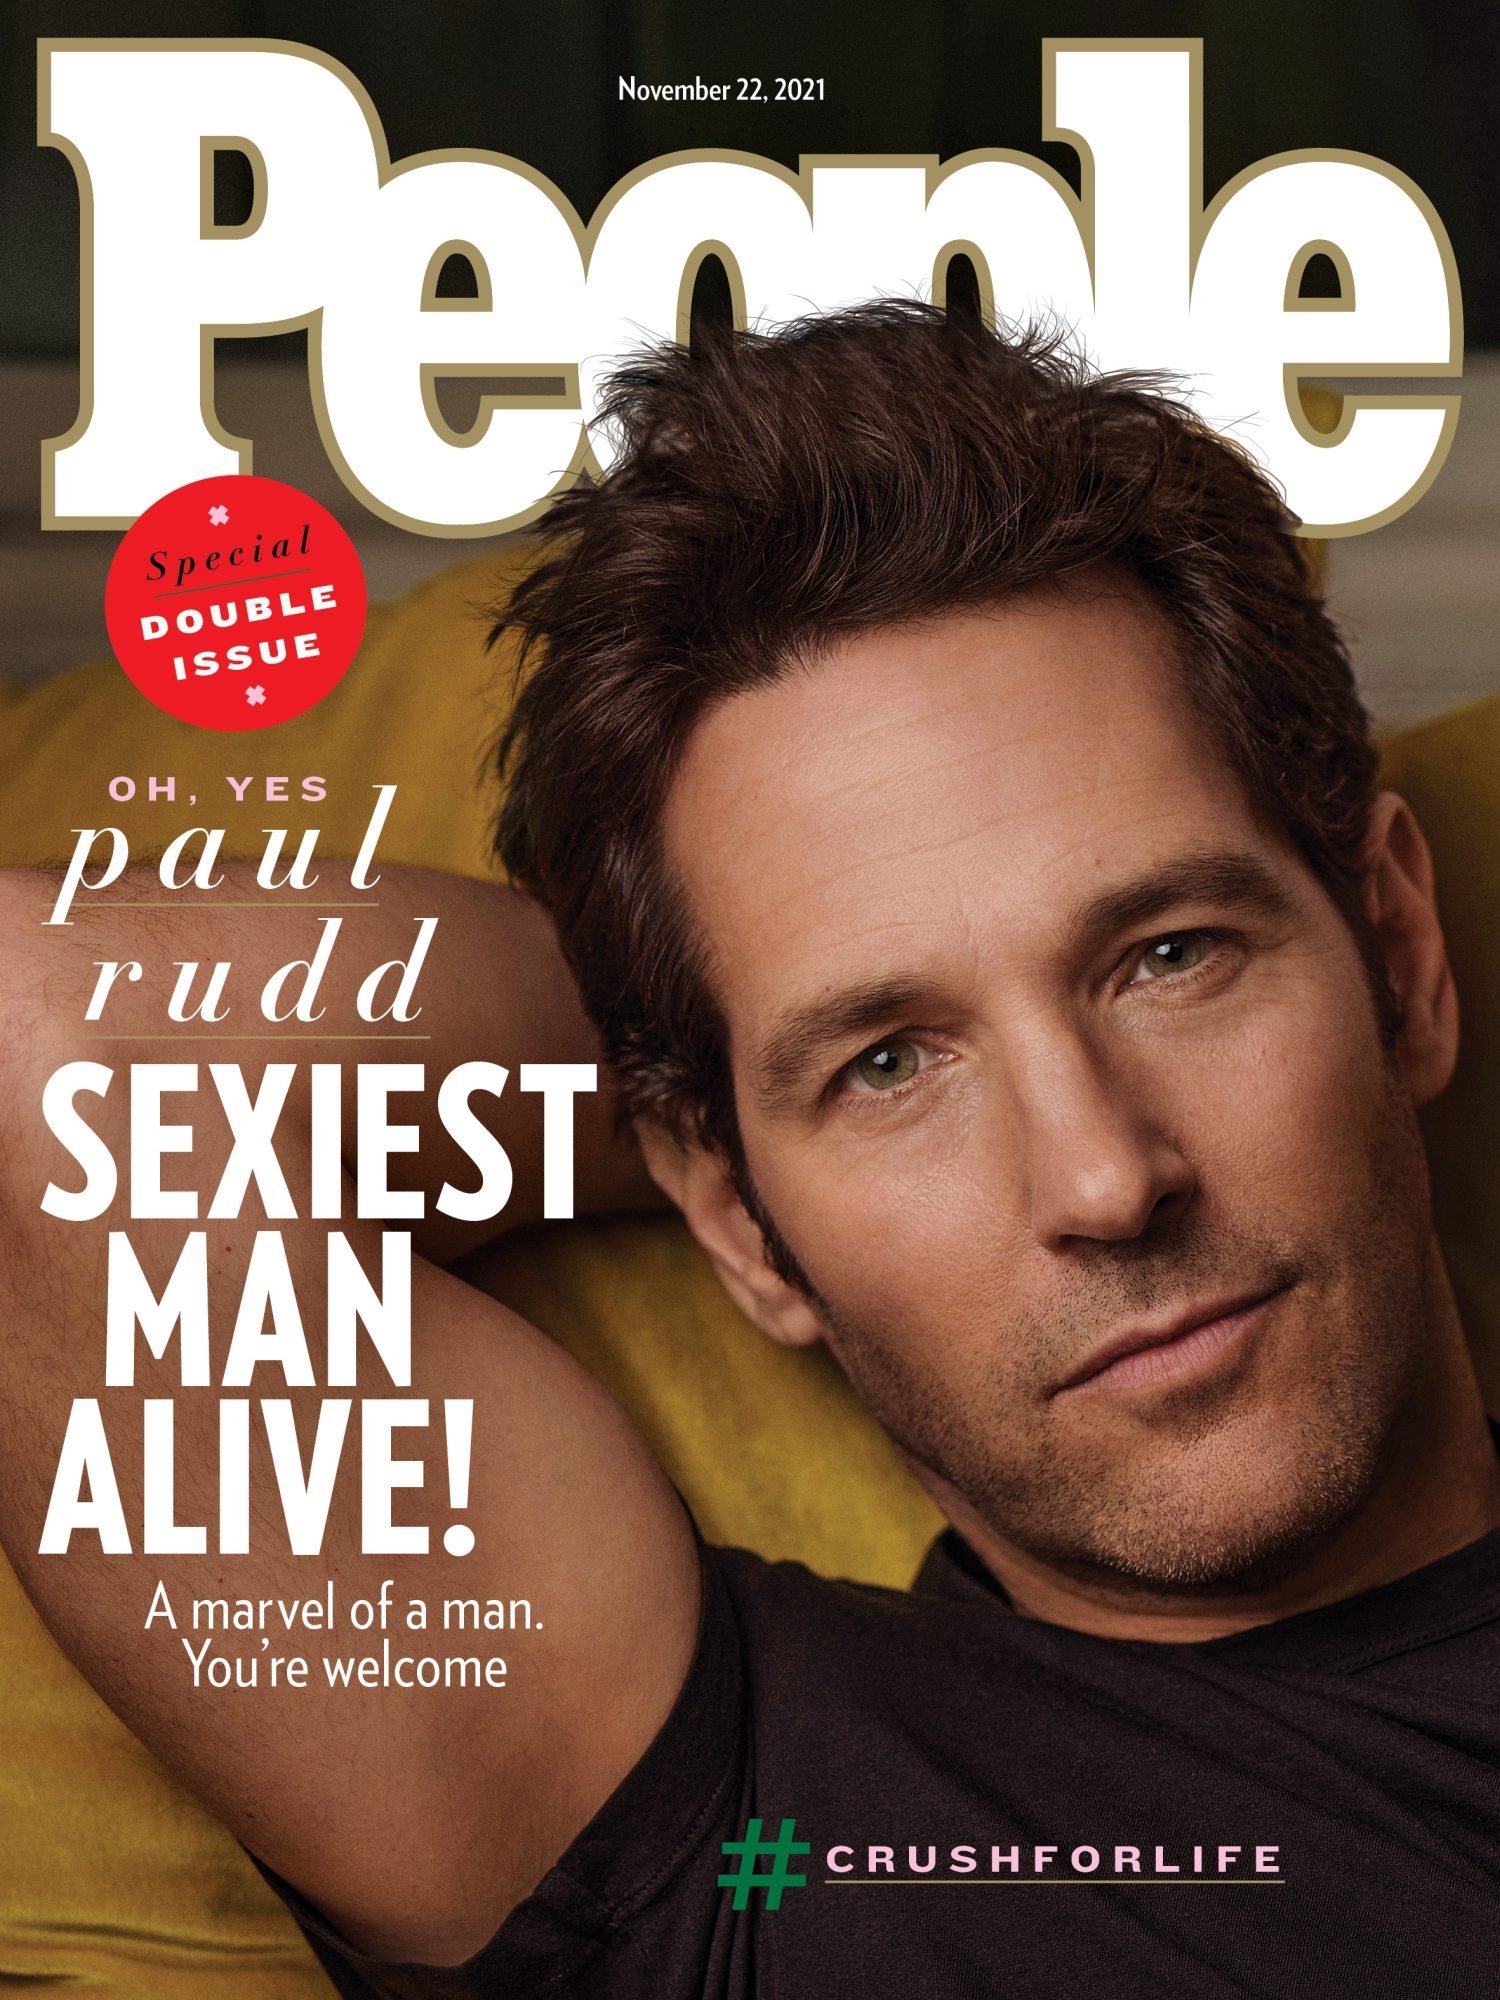 Actor Paul Rudd Declared 2021’s Sexiest Man Alive By People Magazine